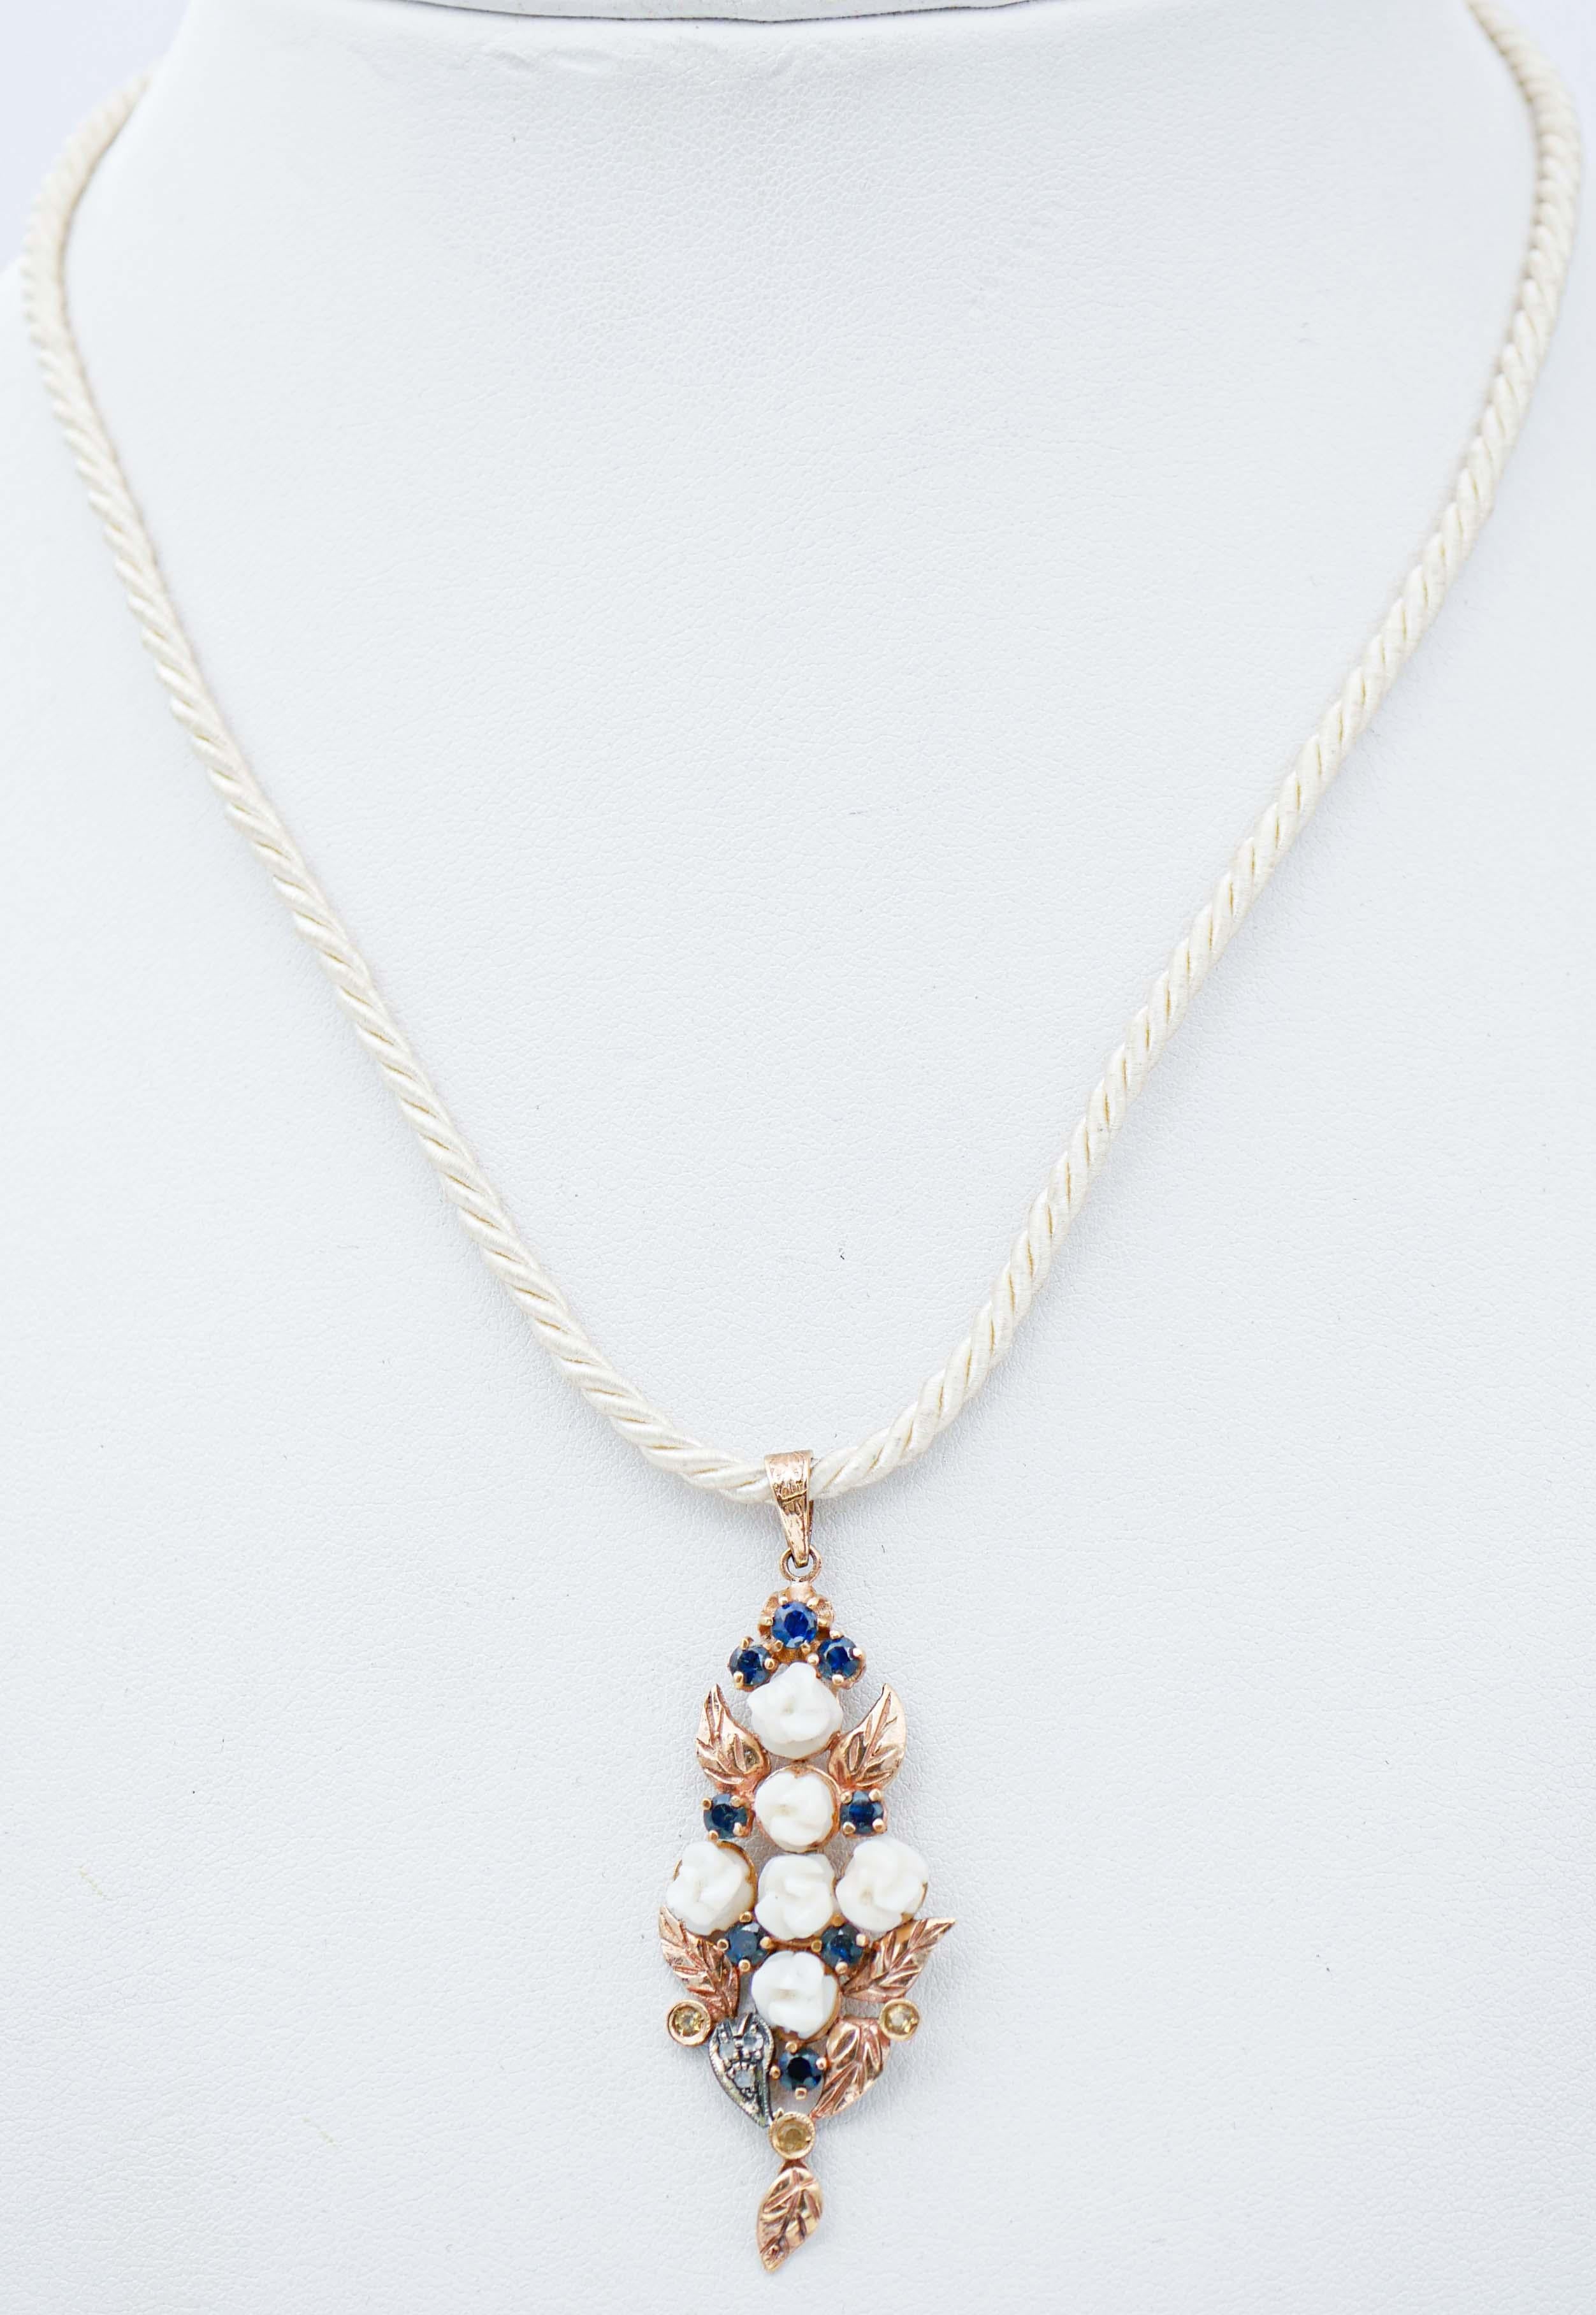 Beautiful retrò pendant in 9 karat rose gold and silver structure mounted with flowers of white coral between blue and yellow sapphires and diamonds.
This pendant was totally handmade by Italian master goldsmiths and it is in perfect